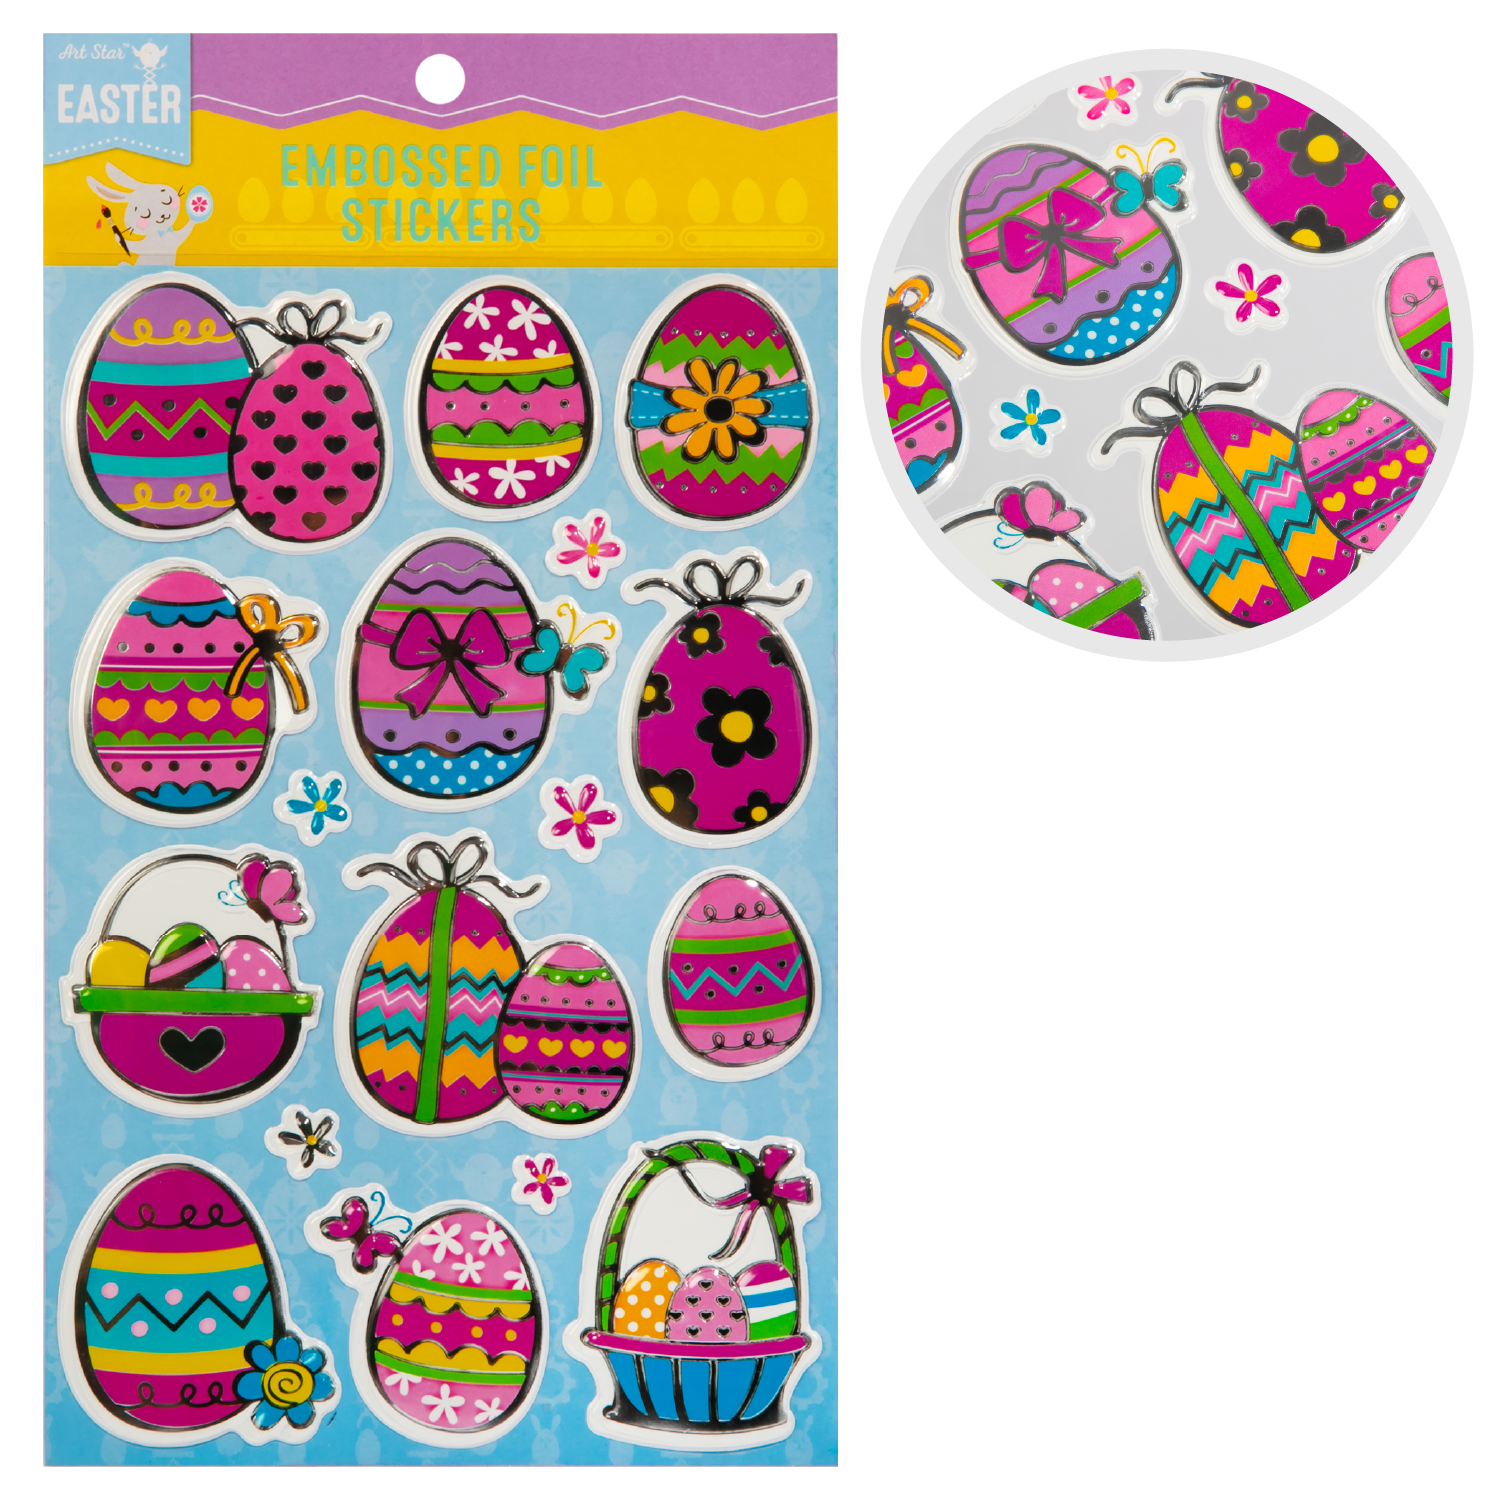 Image of Art Star Easter Embossed Foil Sticker-Eggs and Baskets 250x140mm